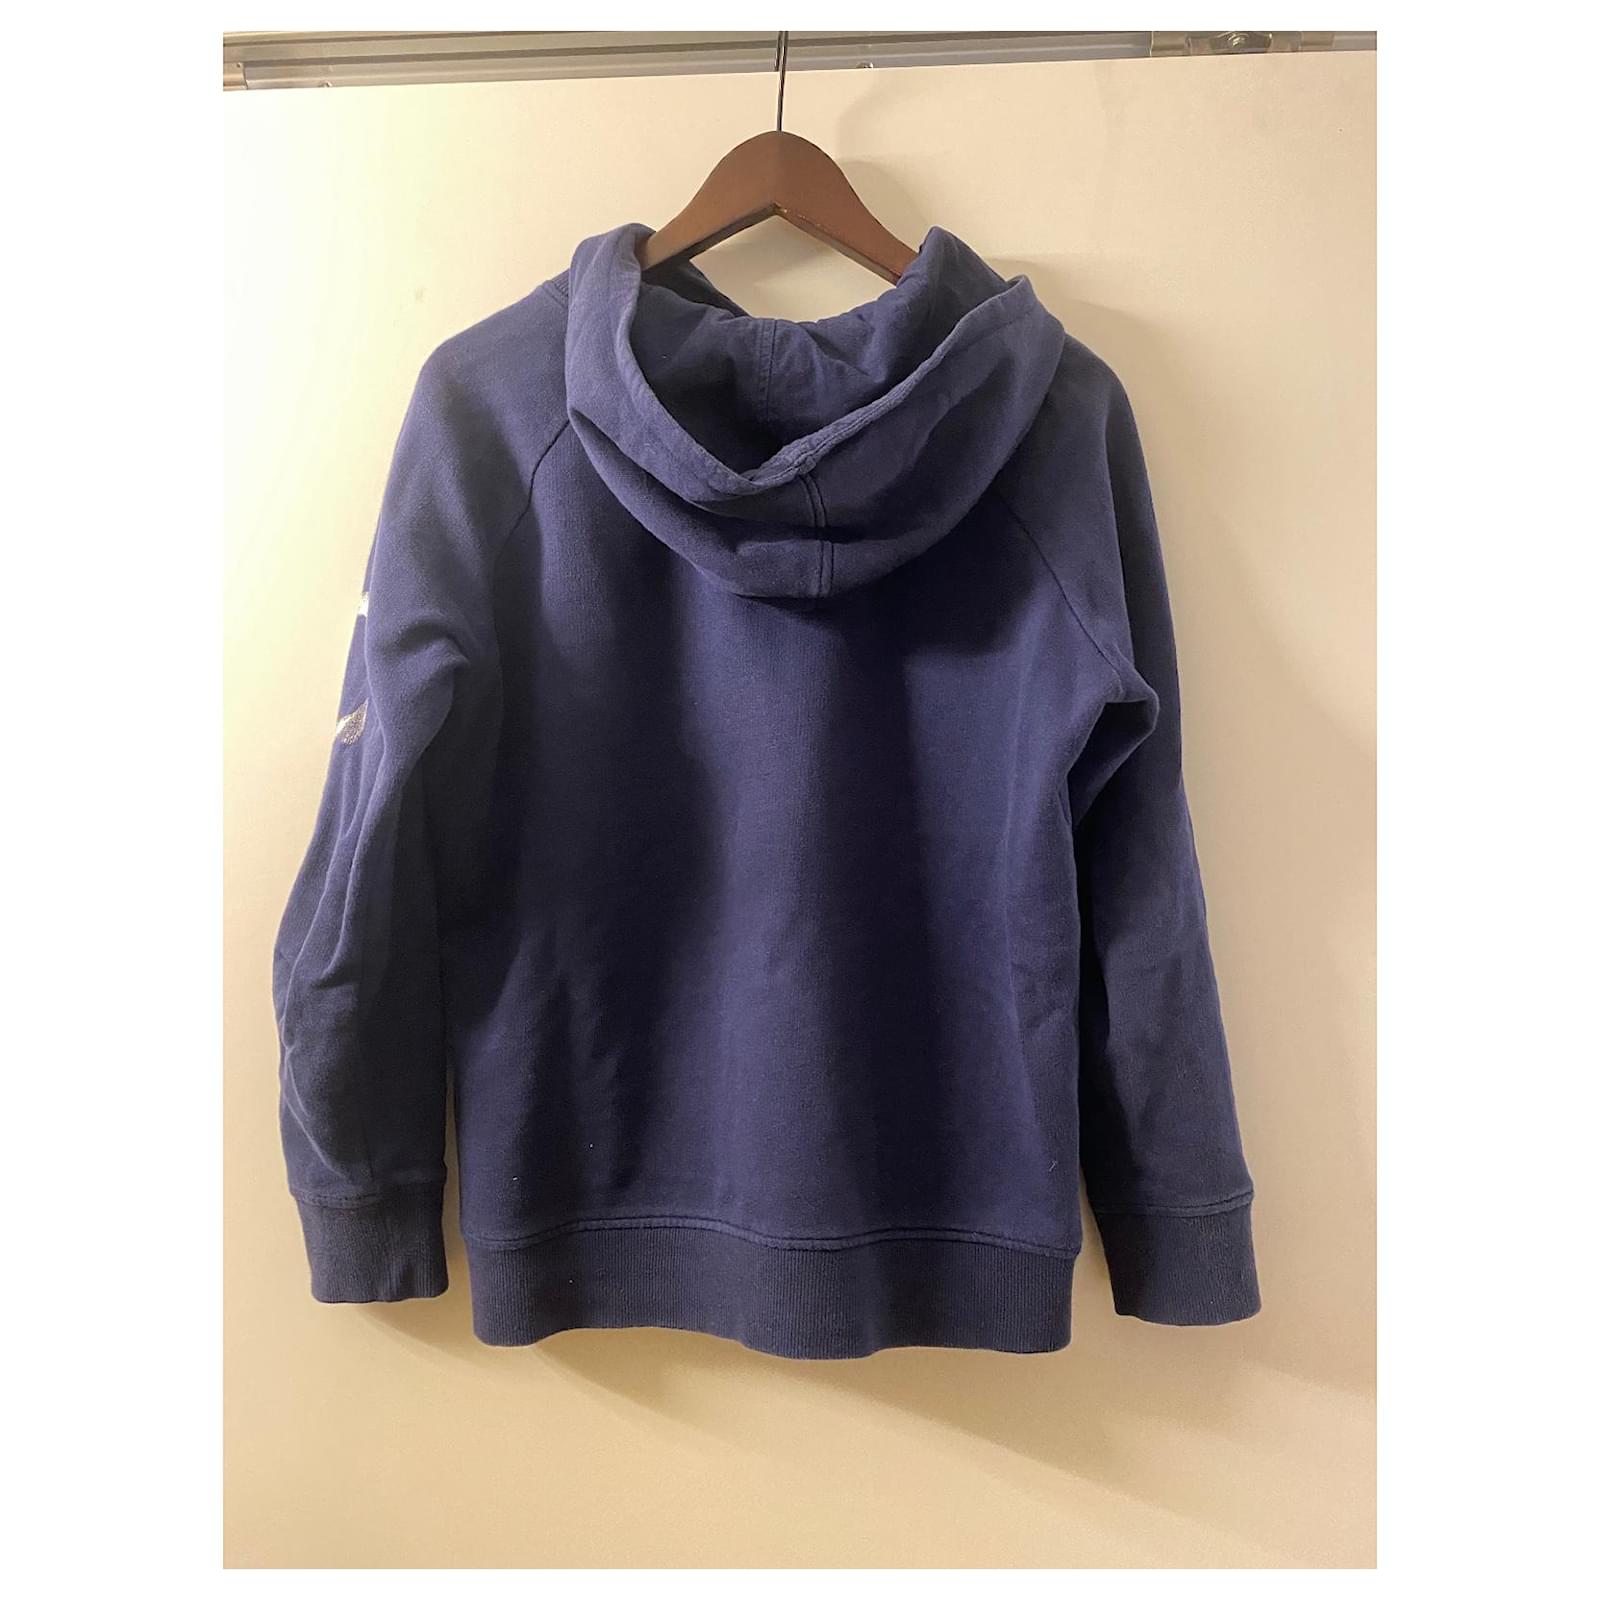 MIDNIGHT BLUE HOODED SPORT LINE SWEATSHIRT, CHANEL, A Collection of a  Lifetime: Chanel Online, Jewellery